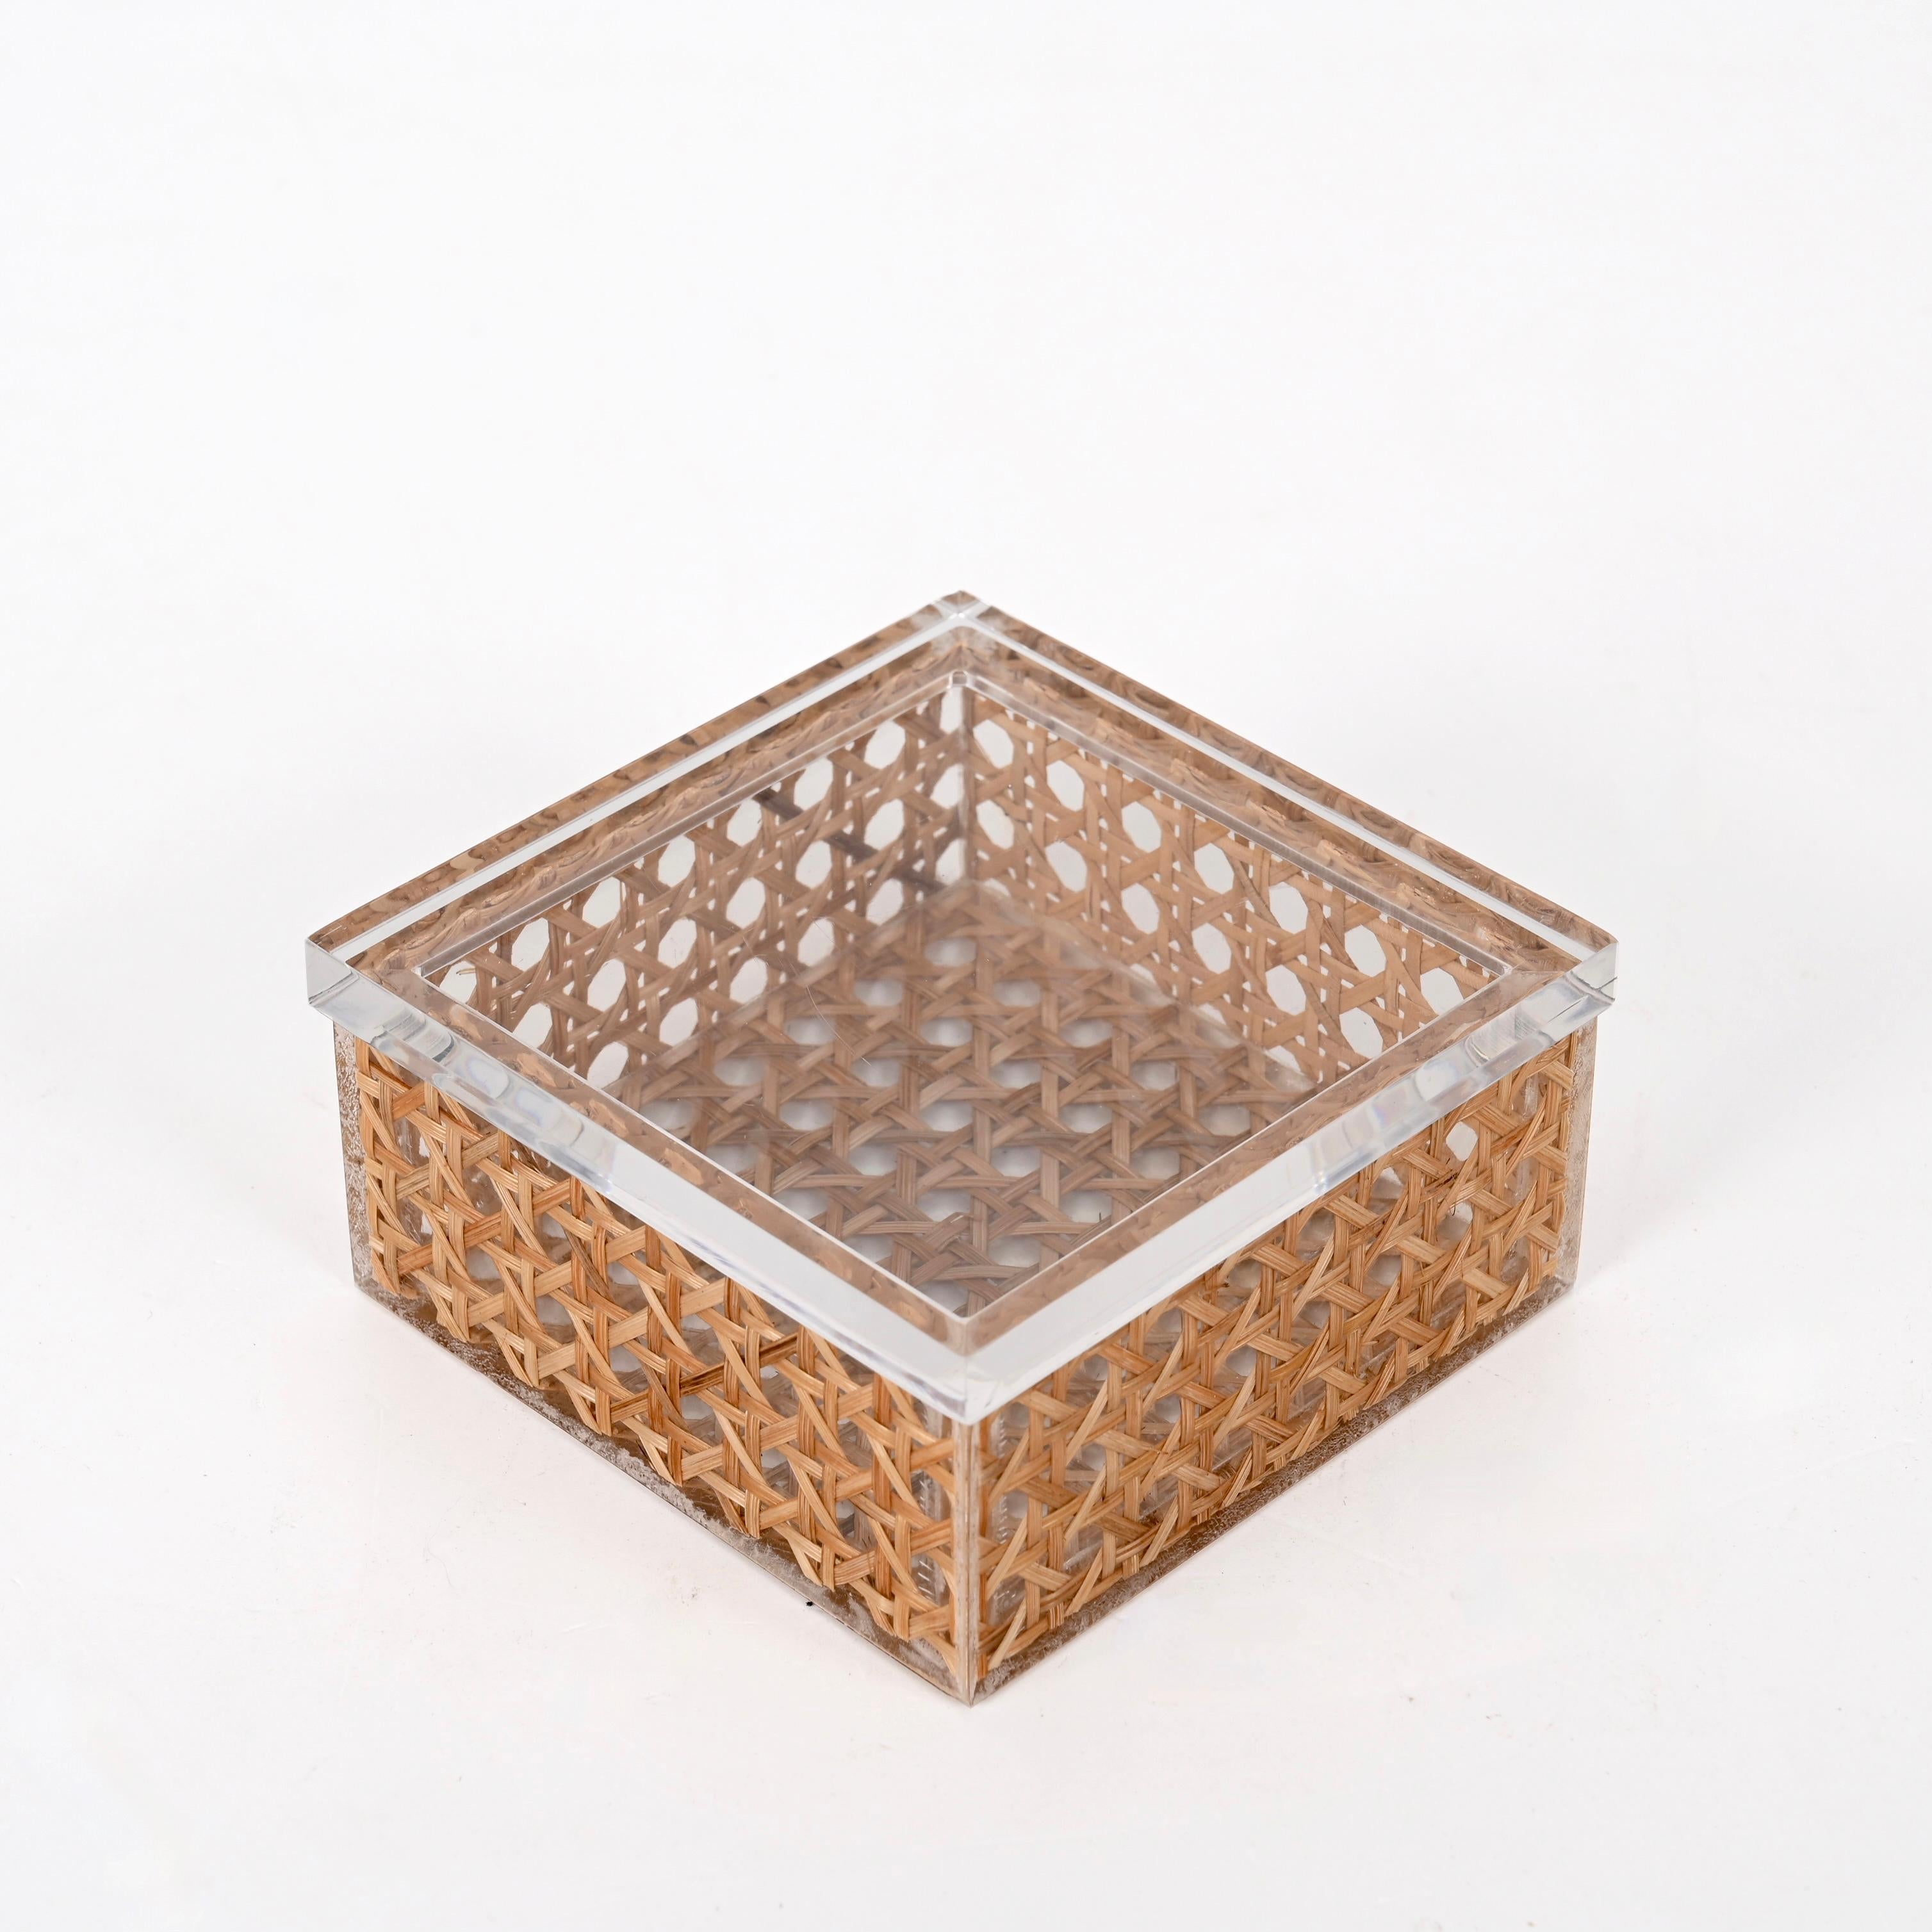 Stunning midcentury Lucite and Vienna straw wicker box. This marvelous jewelry box was designed in Italy during 1970s, following the style of Christian Dior.

It is made of two pieces, a clear lucite top part and a larger bottom one decorated with